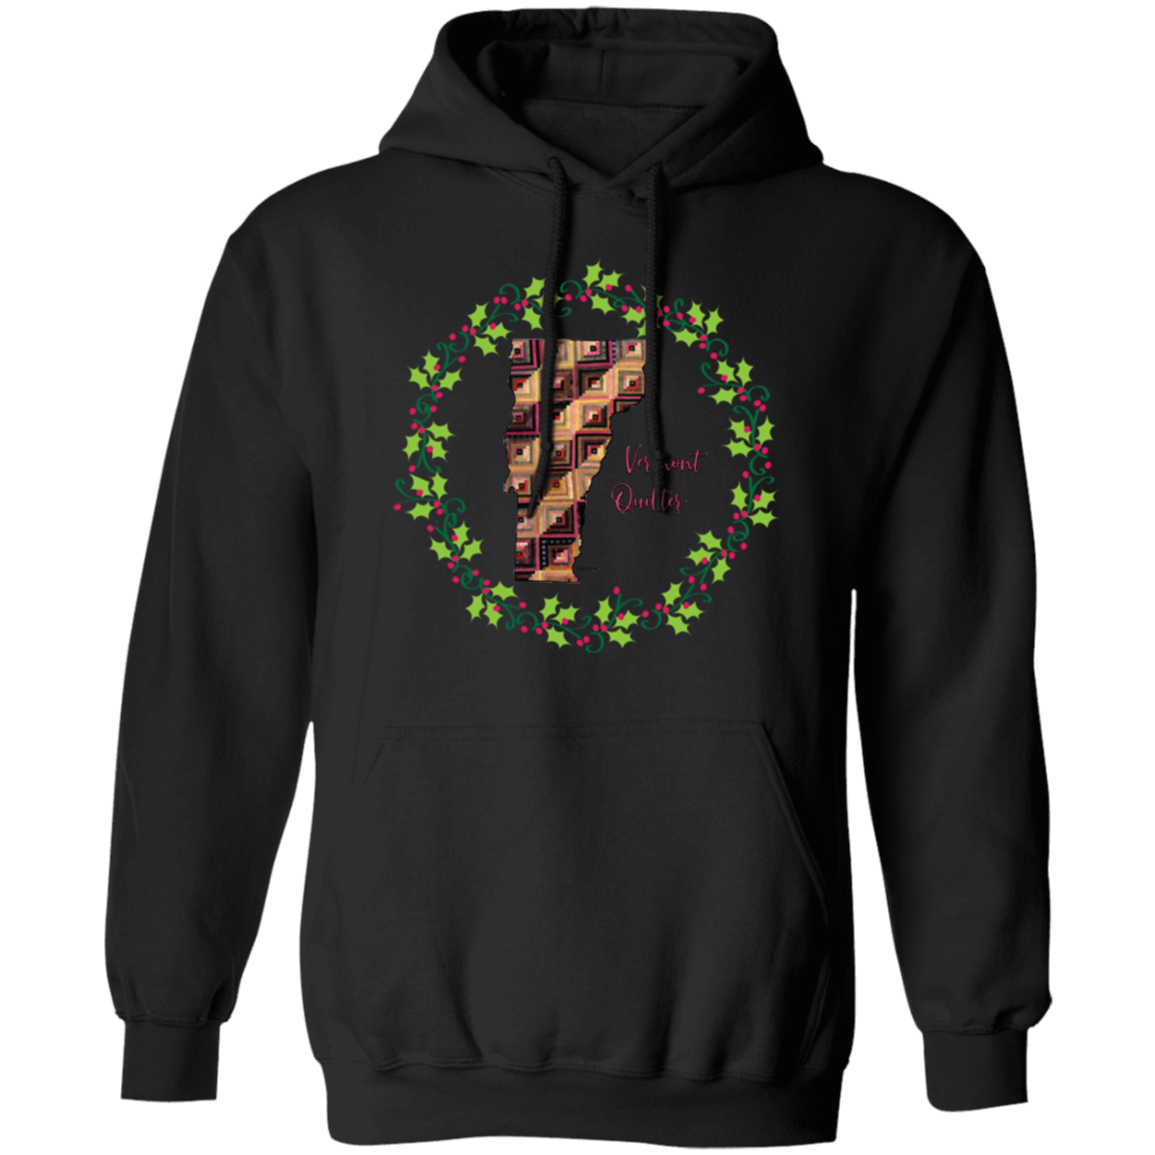 Vermont Quilter Christmas Pullover Hoodie